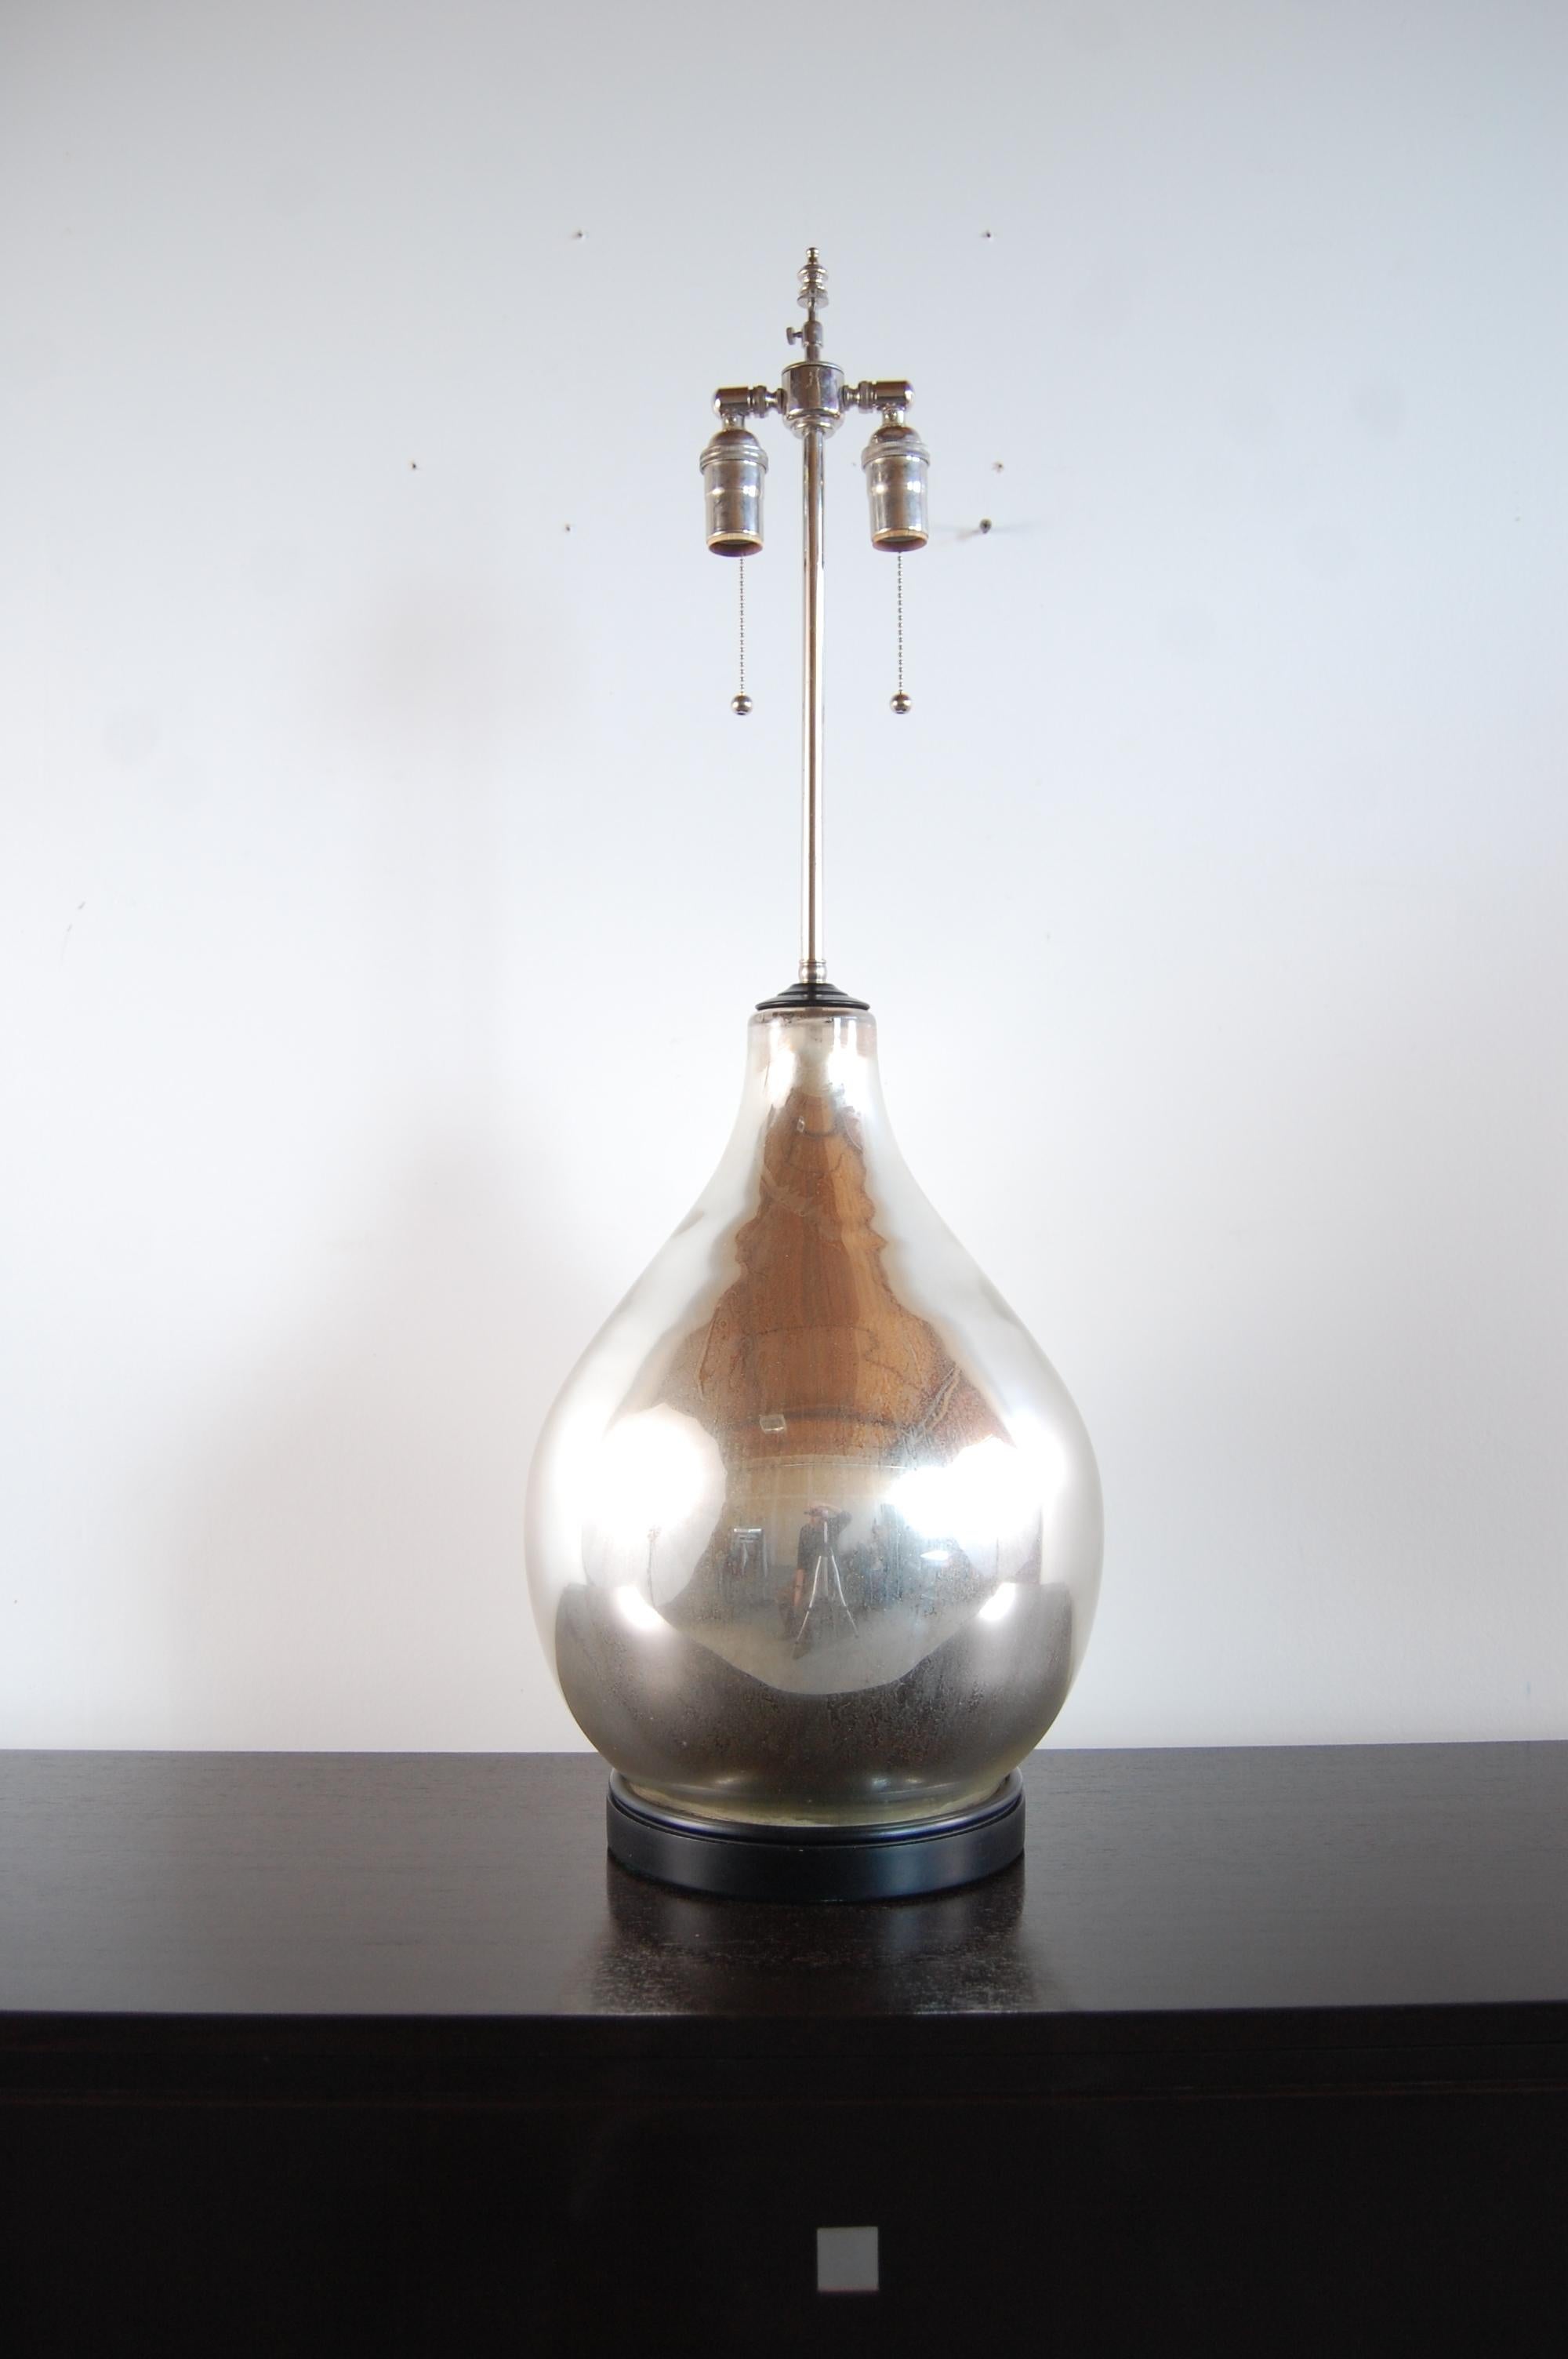 Large mercury glass lamp, circa 1968. Completely re-wired for safety, as all vintage lighting should be. Outfitted with top of the line, nickel plated brass hardware. Base and cap are steel, painted black. Body of lamp is 12 1/2